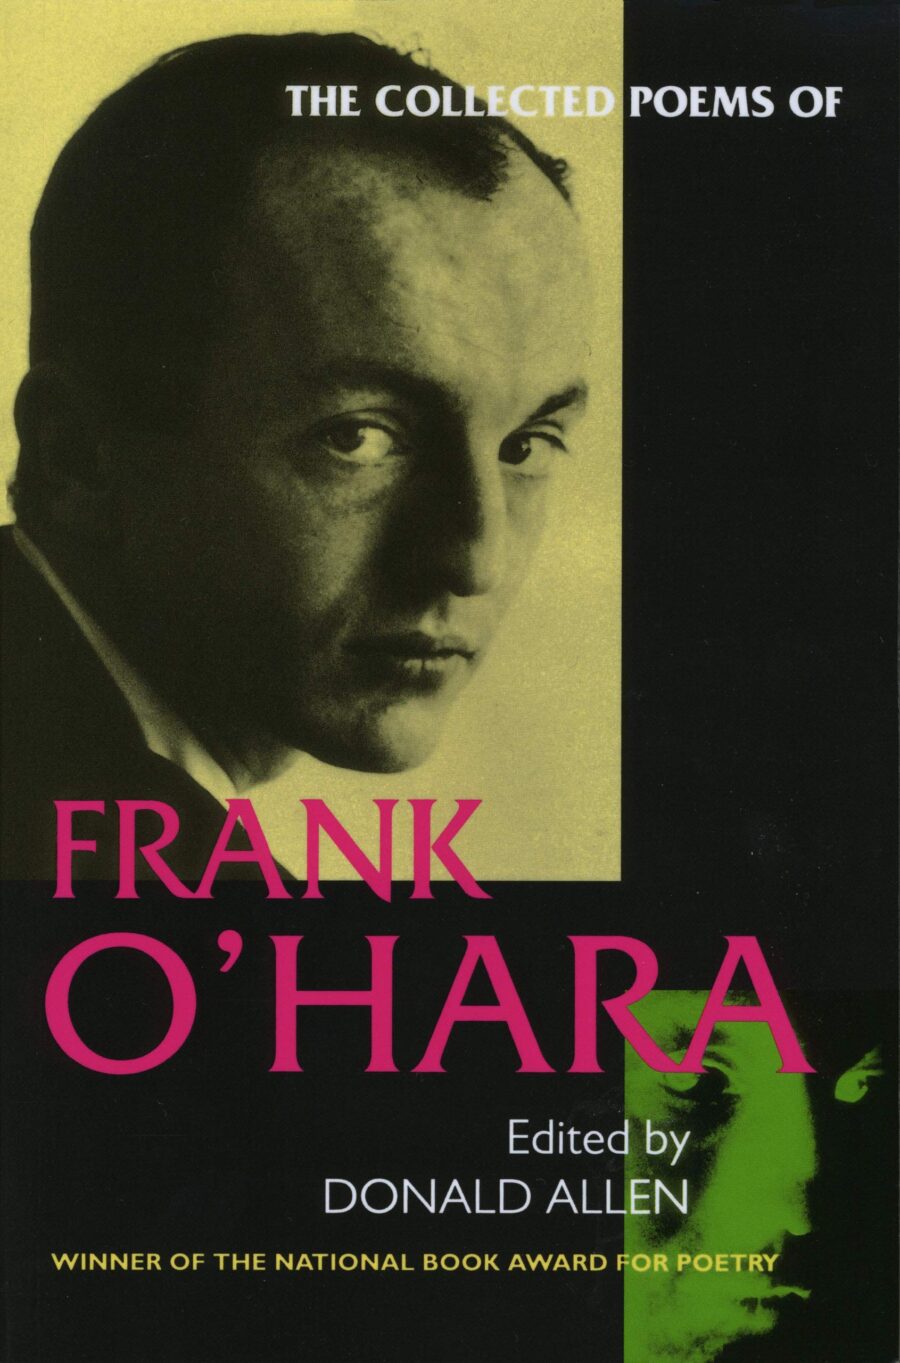 The_Collected_Poems_Of_Frank_O’Hara